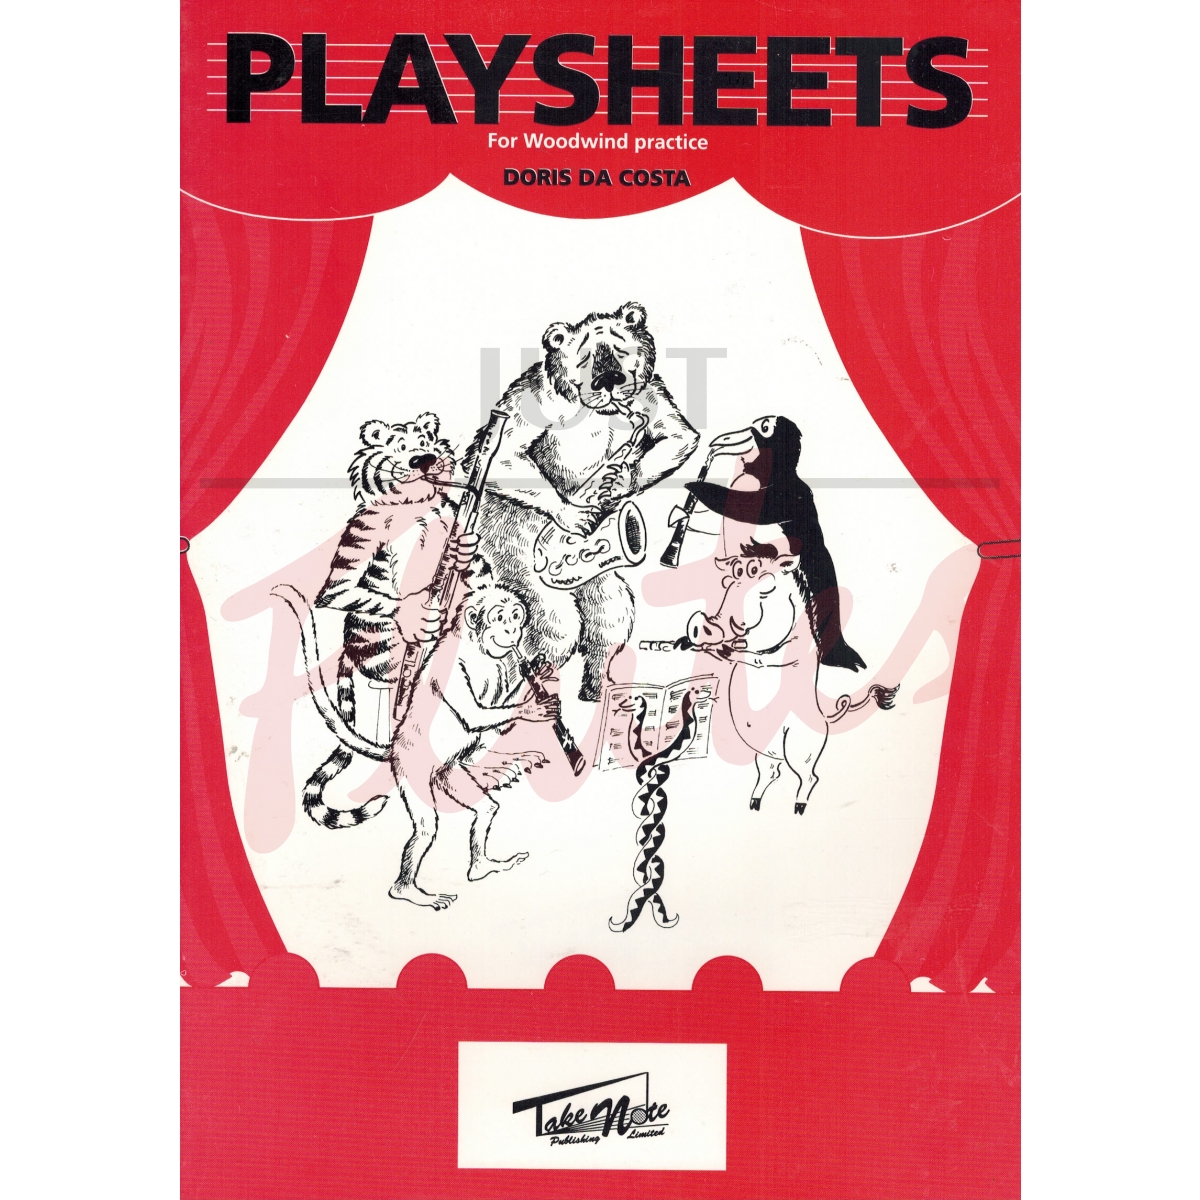 Playsheets (practice aid manual)